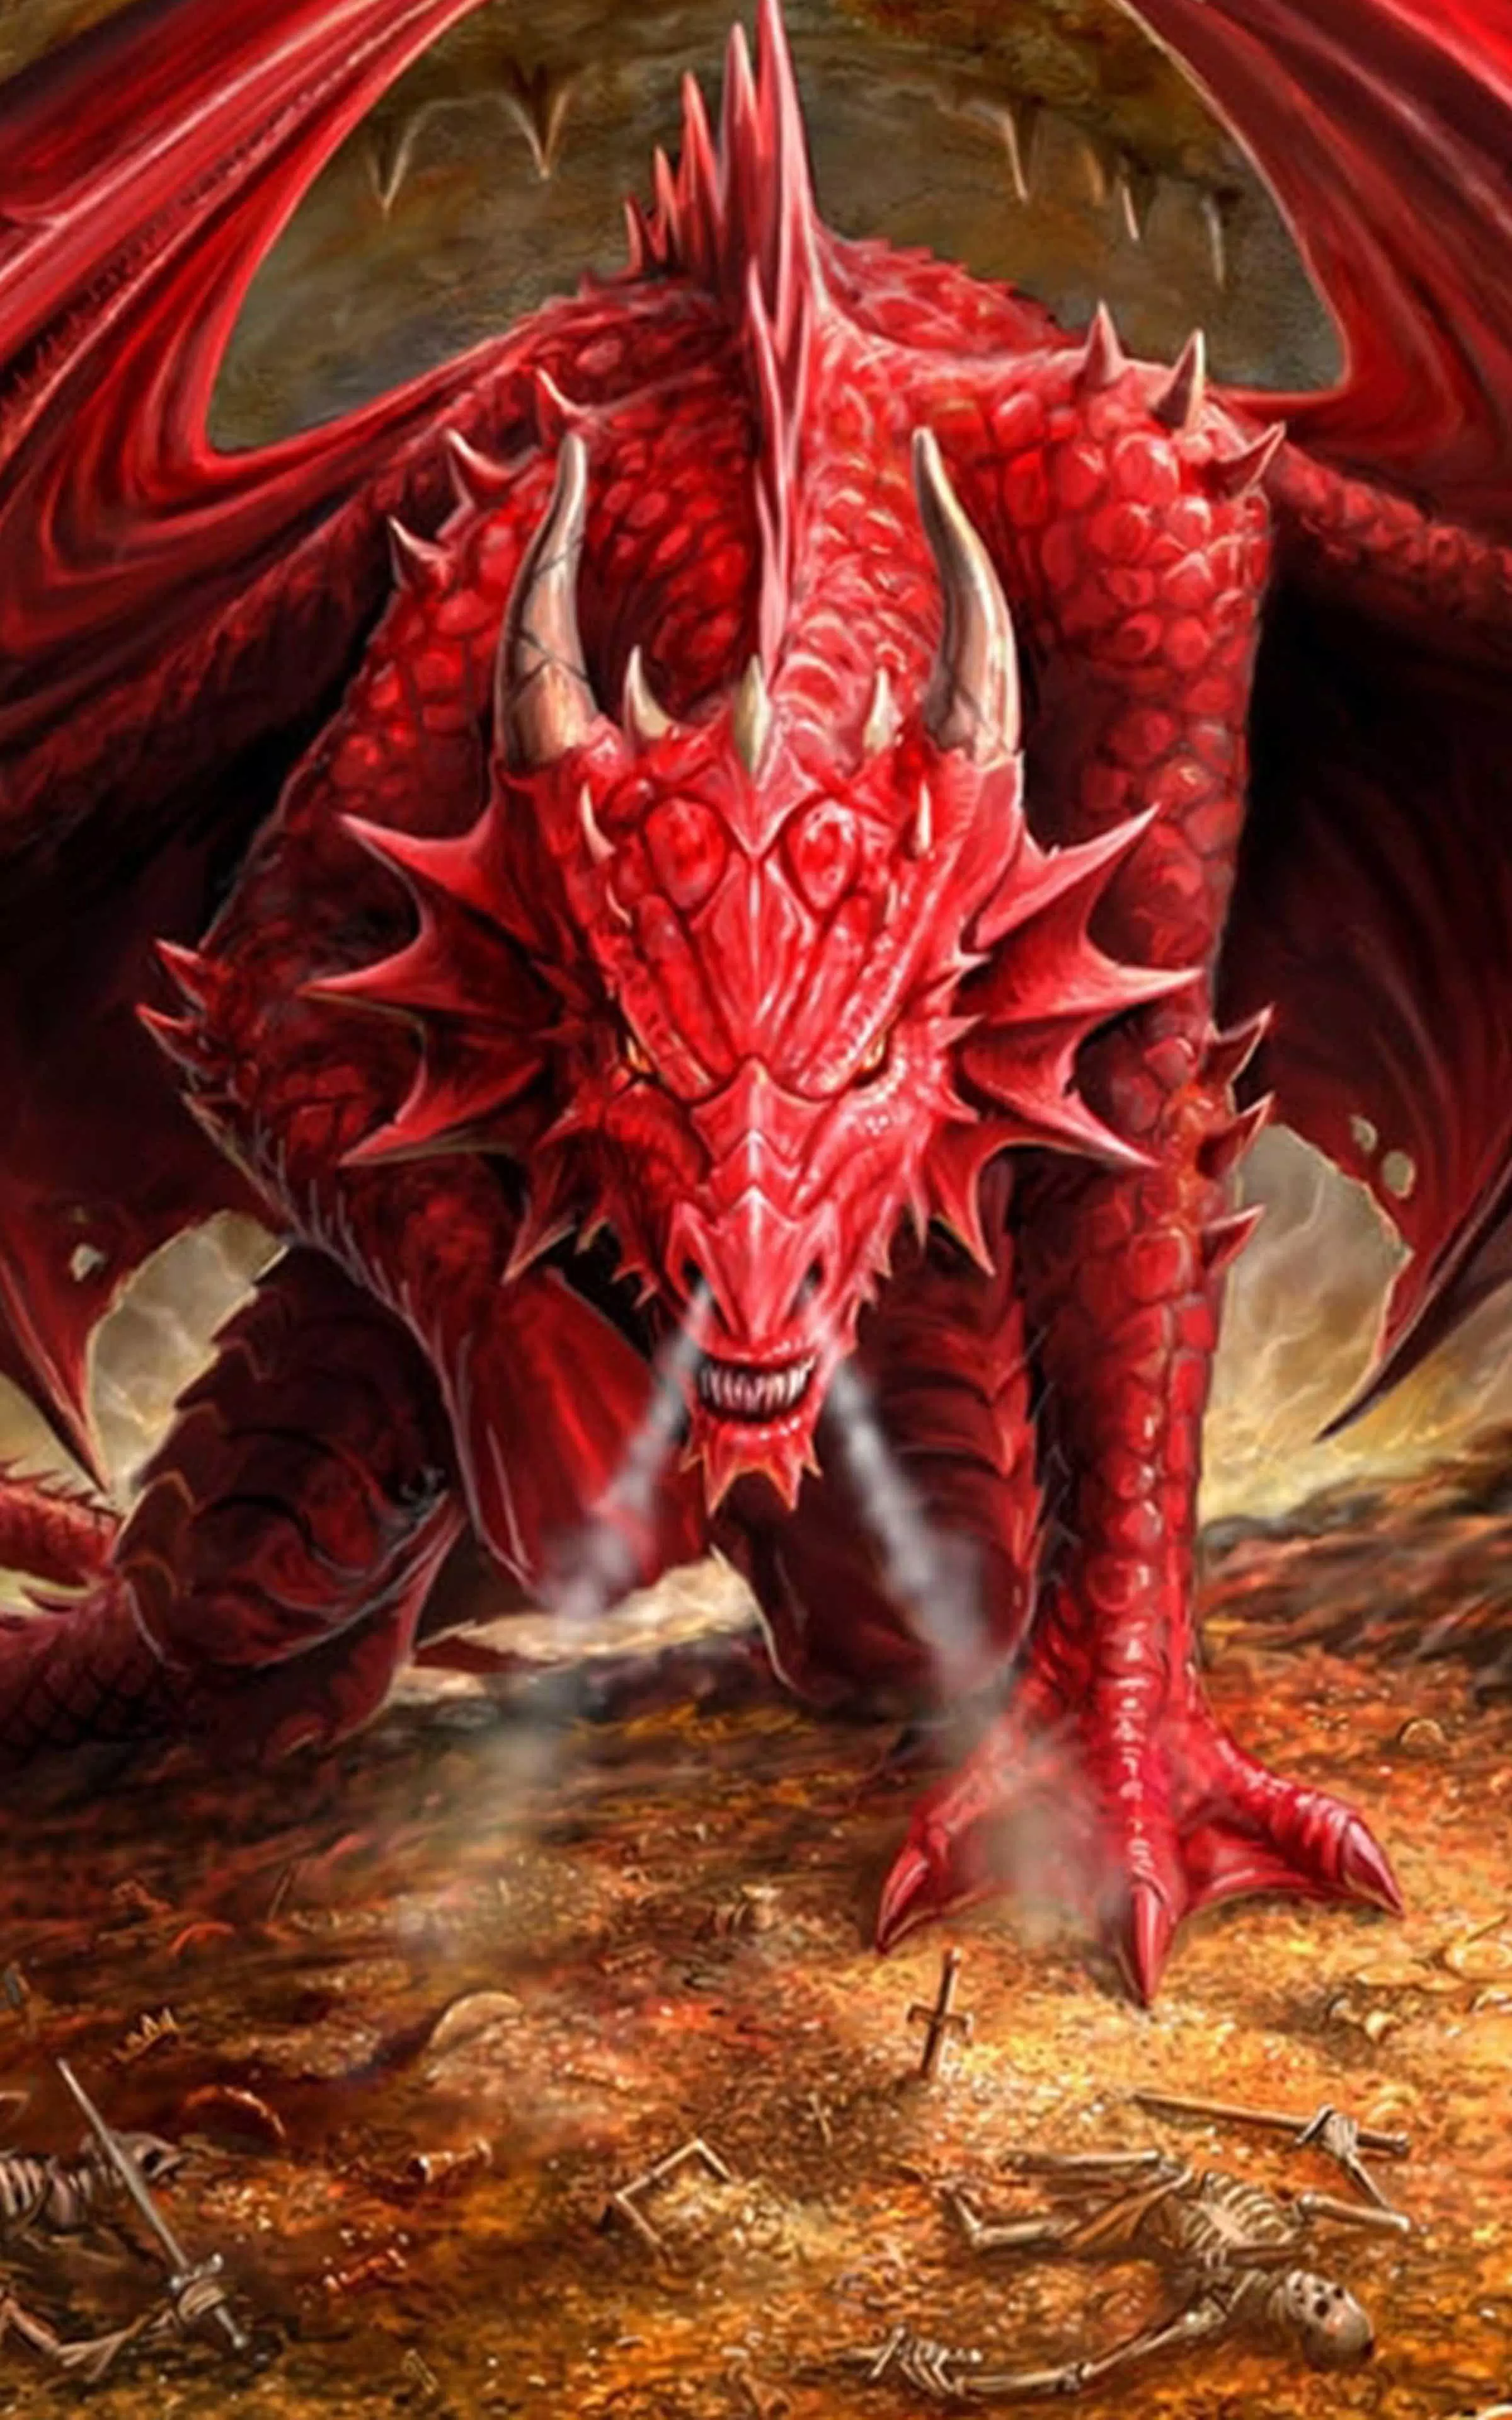 Dragon Wallpapers APK for Android Download